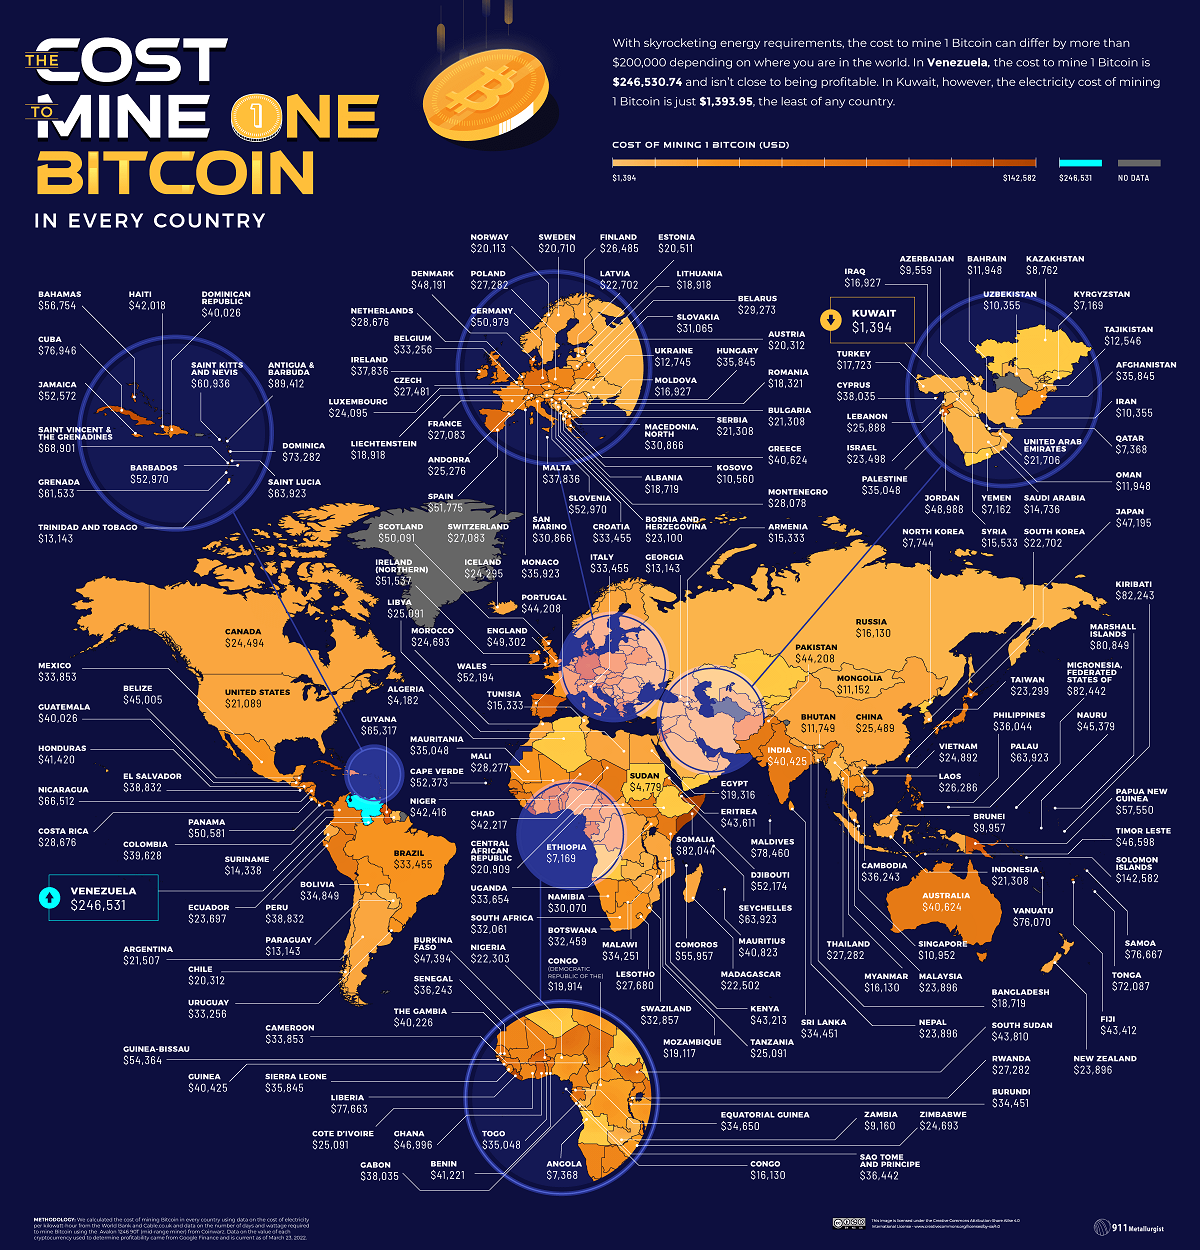 Map comparing the cost of mining bitcoin in 198 countries